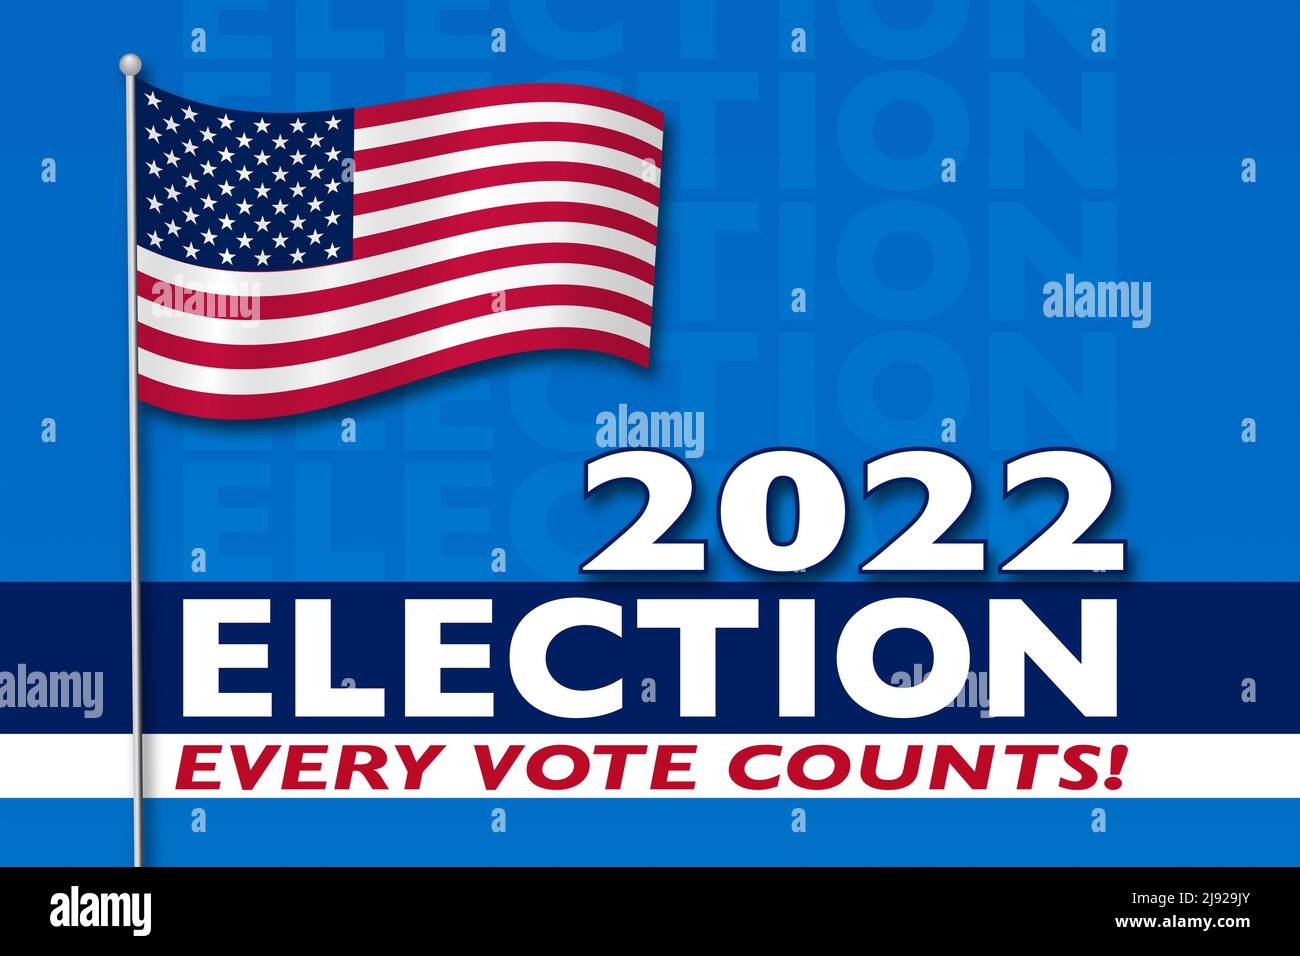 2022 Election - Every Vote Counts with USA flag - Illustration Stock Photo